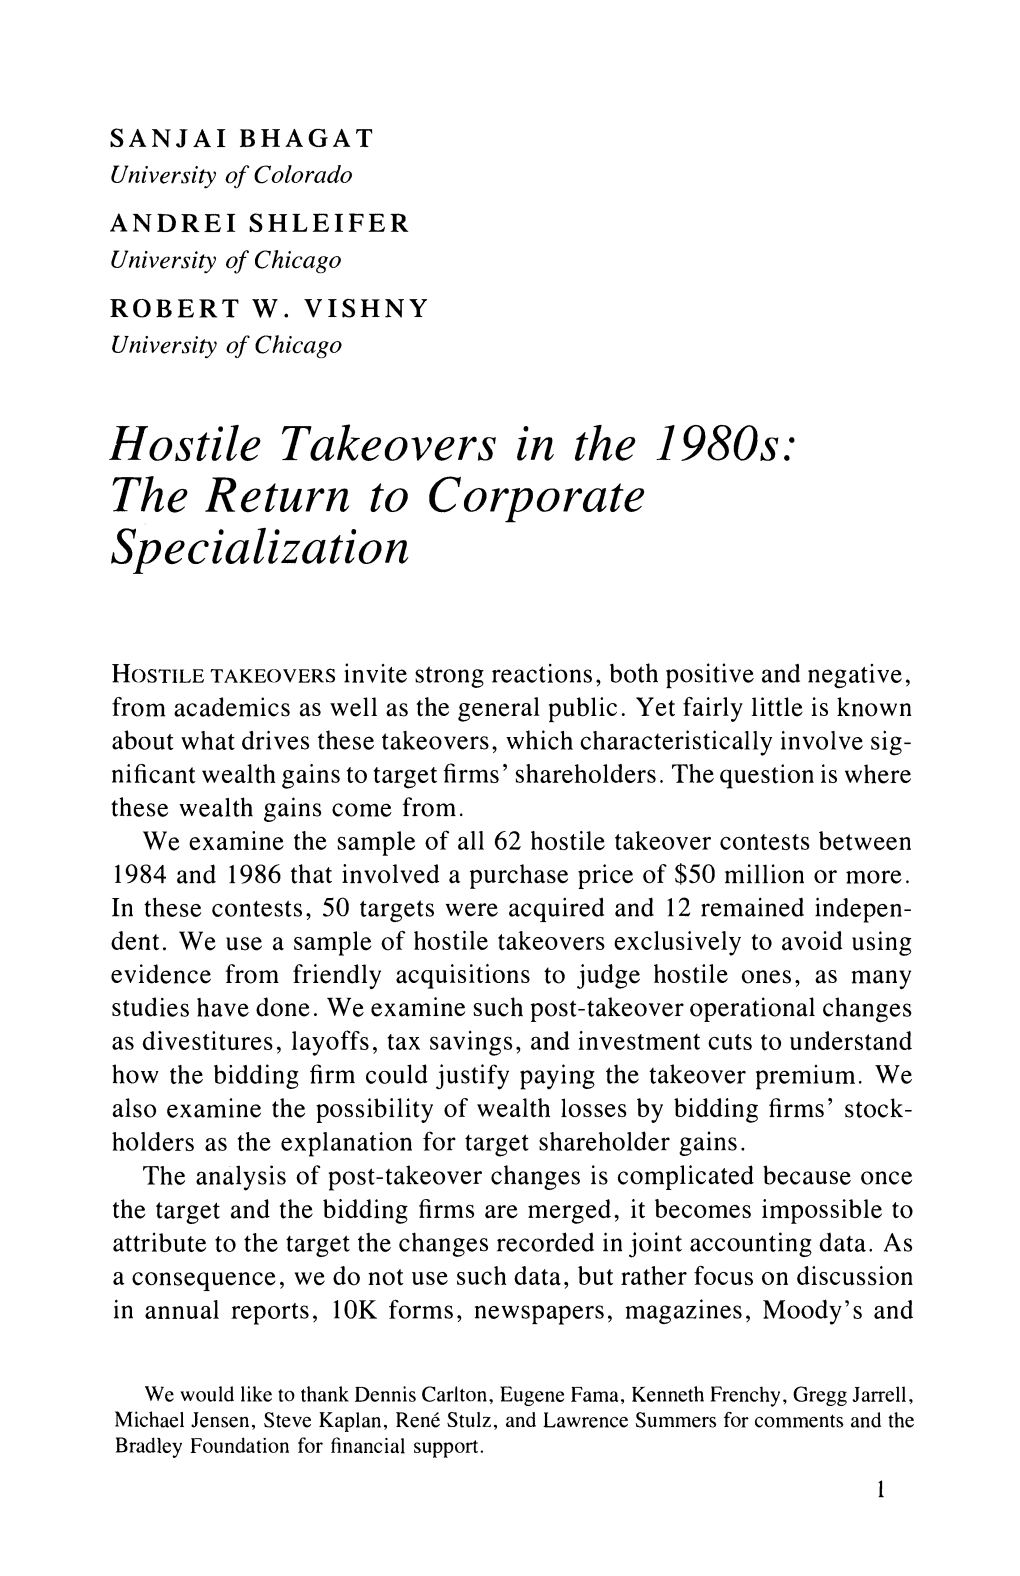 Hostile Takeovers in the 1980S: the Return to Corporate Specialization